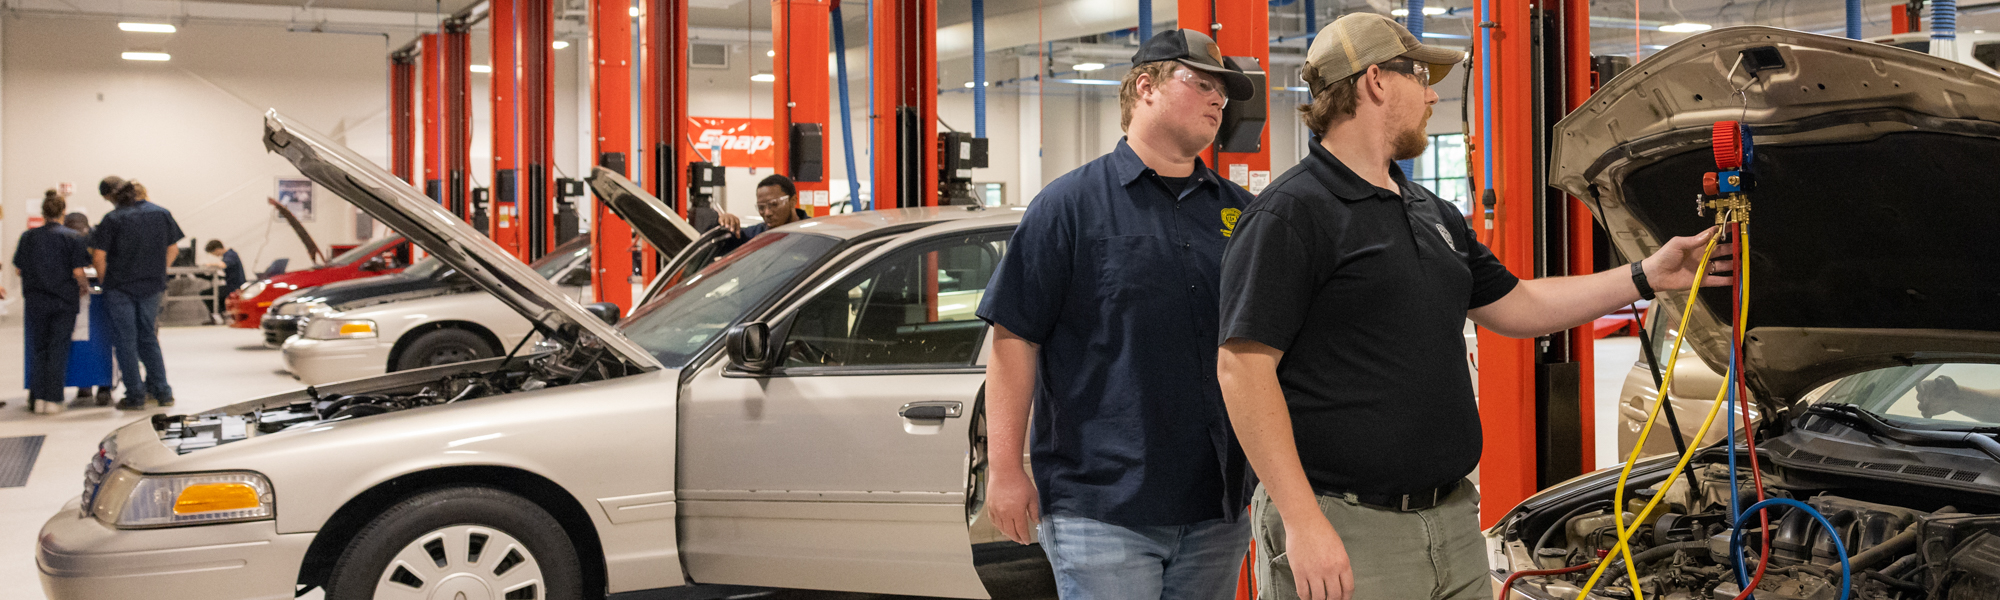 Automotive Technology students at FDTC work on a car in the automotive building shop